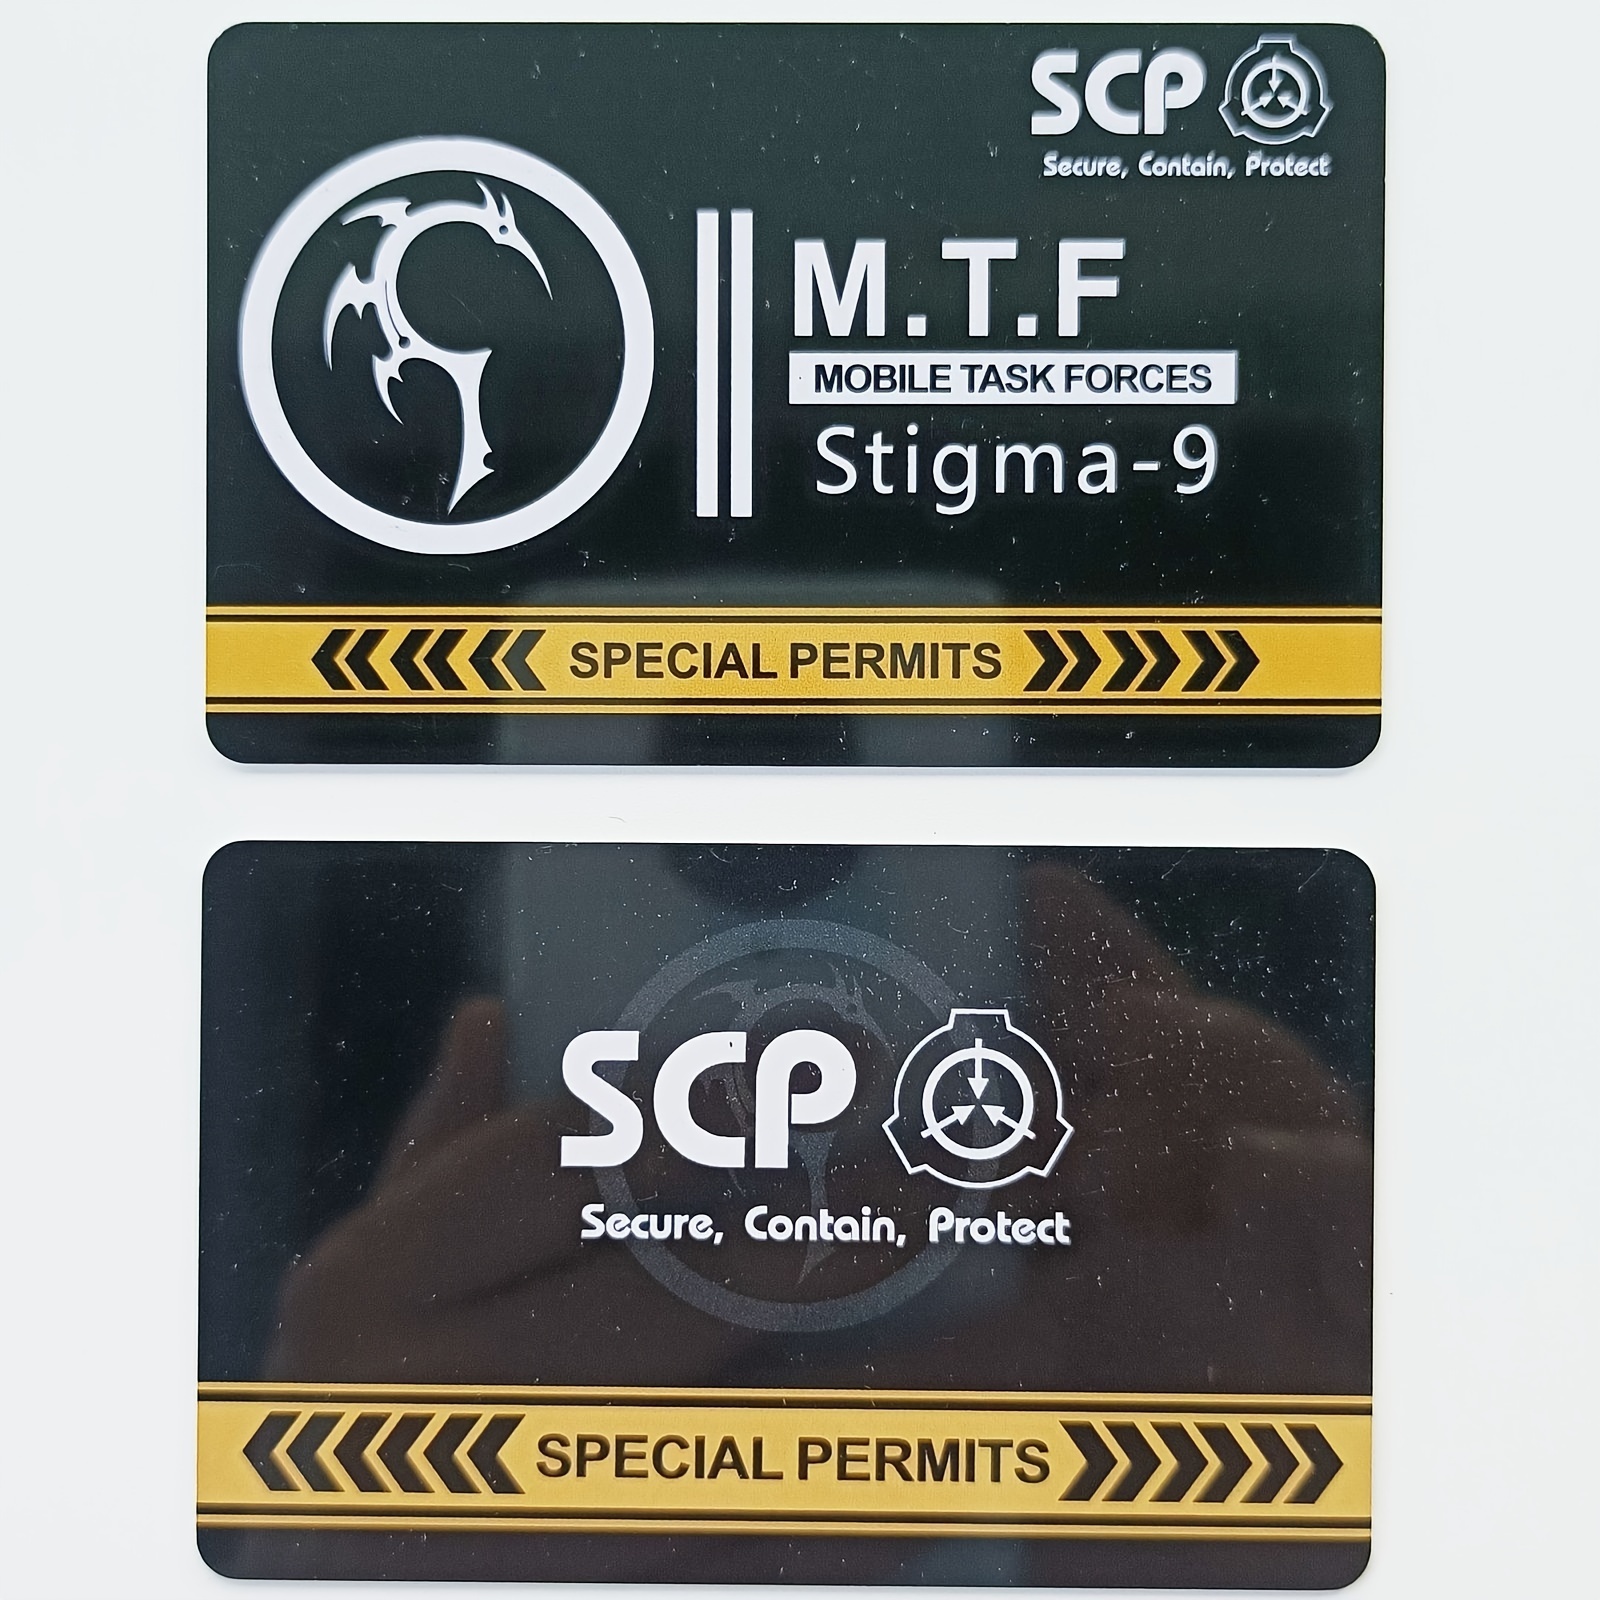 Scp Mobile Task Forces, Scp Foundation Figures